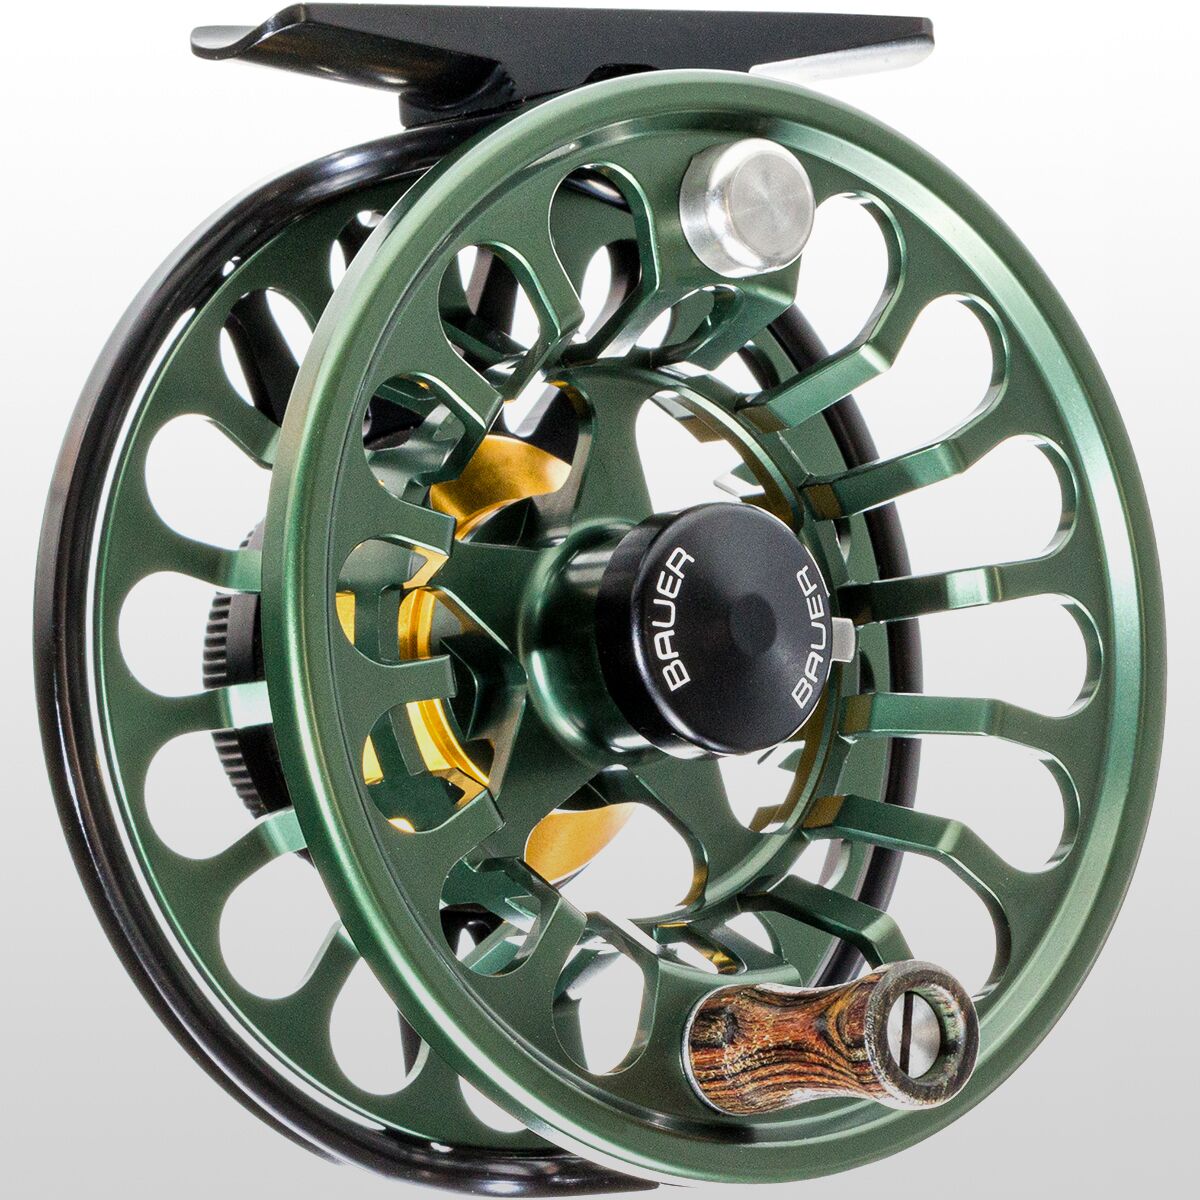 Gently Bauer Rx5 Fly Fishing Reel Black 7-9wt EXCELLNT Shape for sale  online